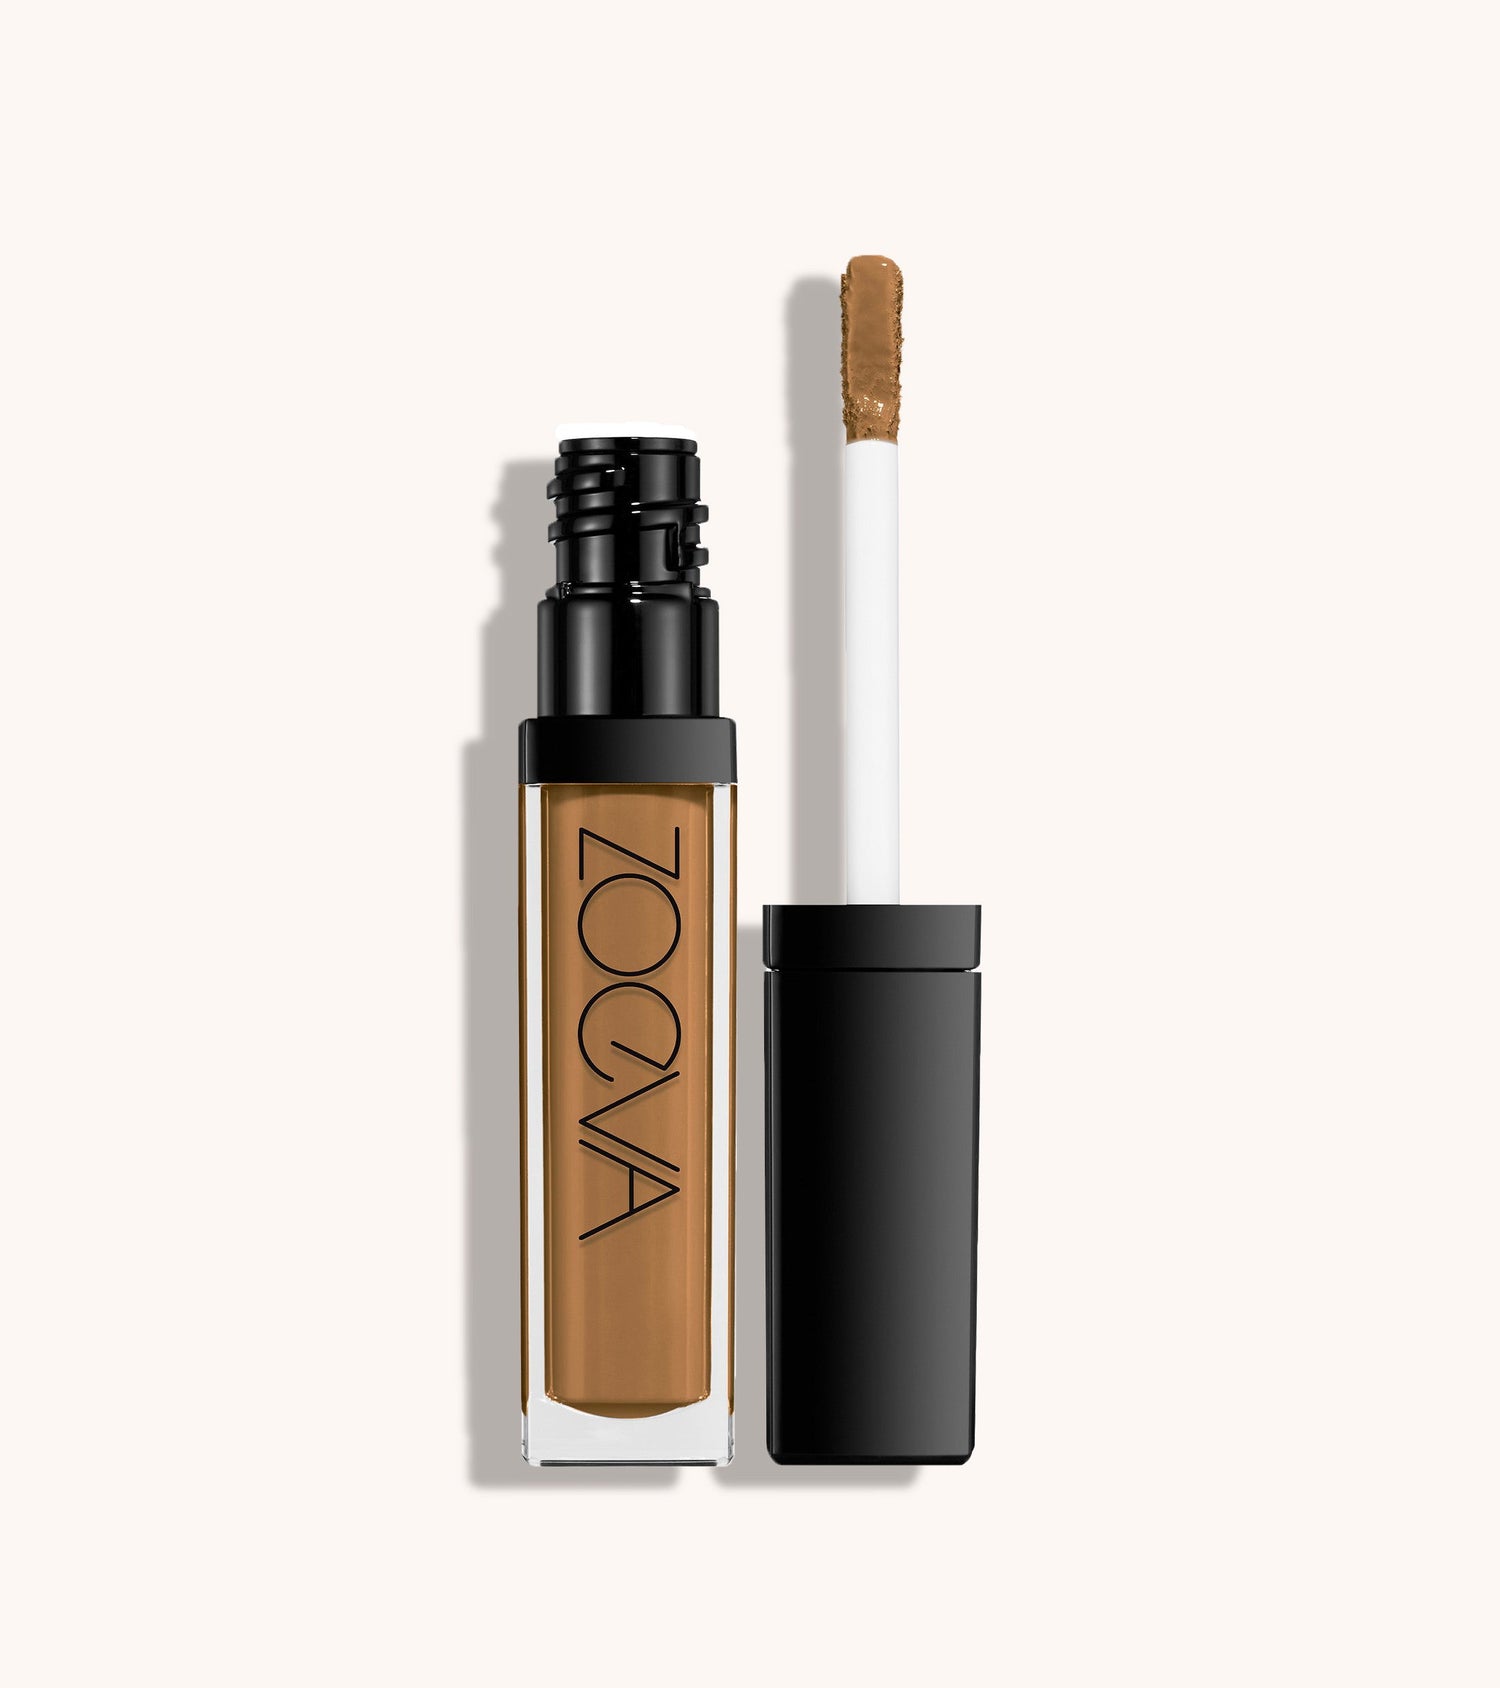 Authentik Skin Perfector Concealer (220 Realistic) Main Image featured